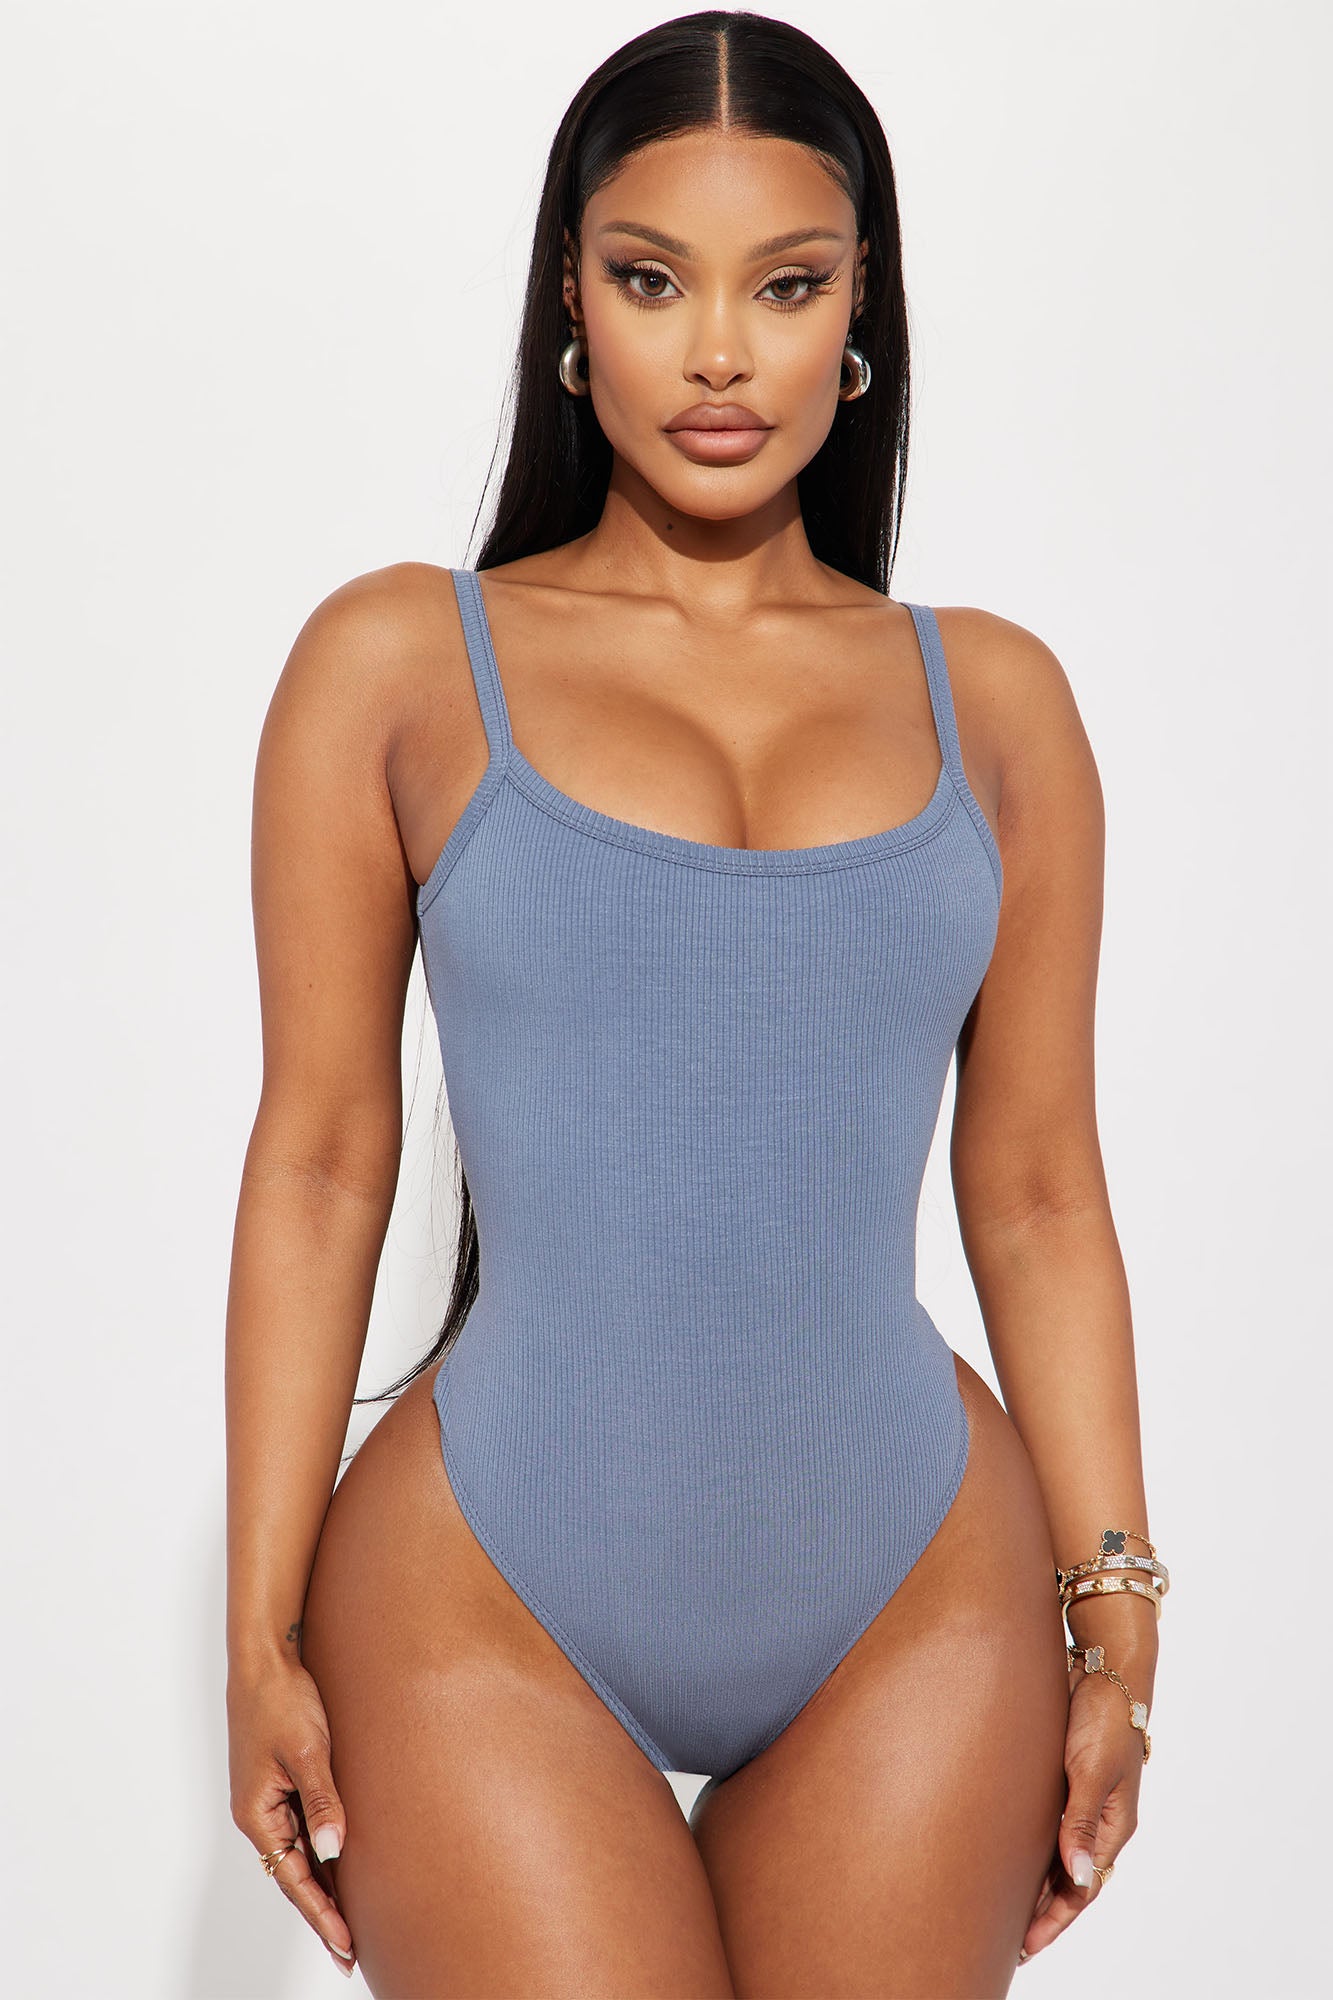 Snatched For Good Bodysuit - Women's Bodysuits